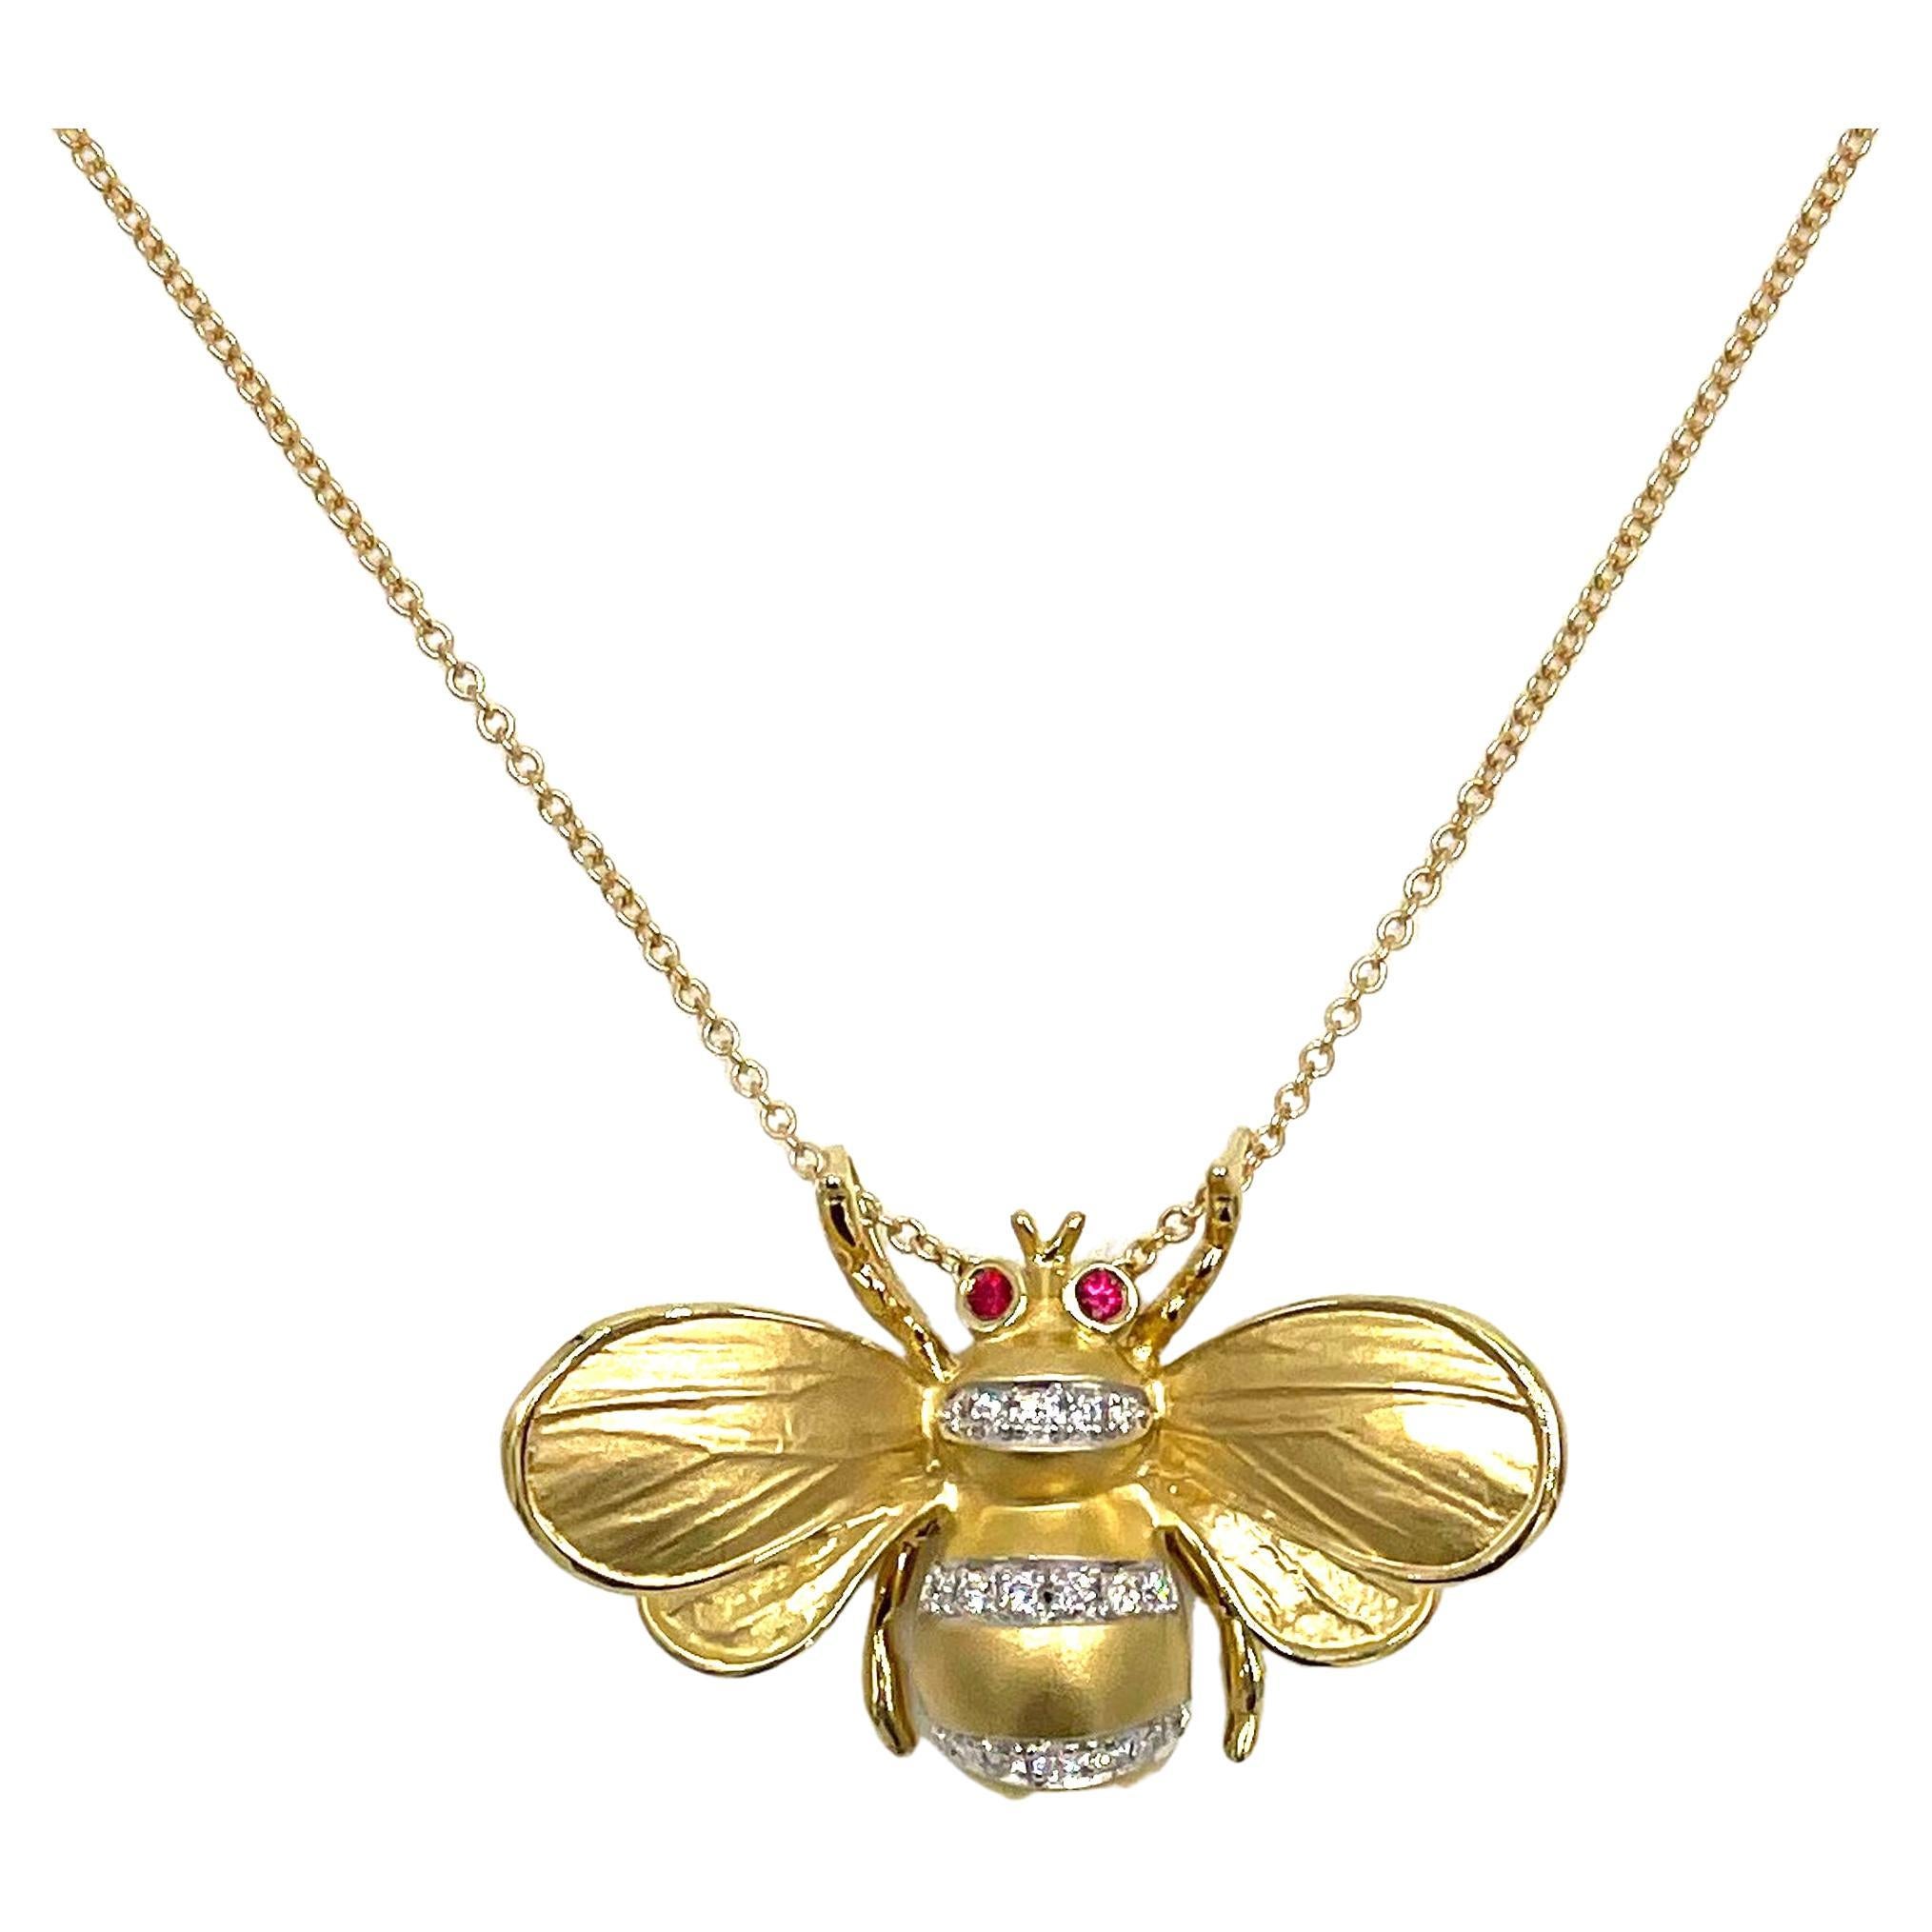 Simon G. DP271 18K Yellow Gold Queen Bee Necklace with Ruby and Diamond